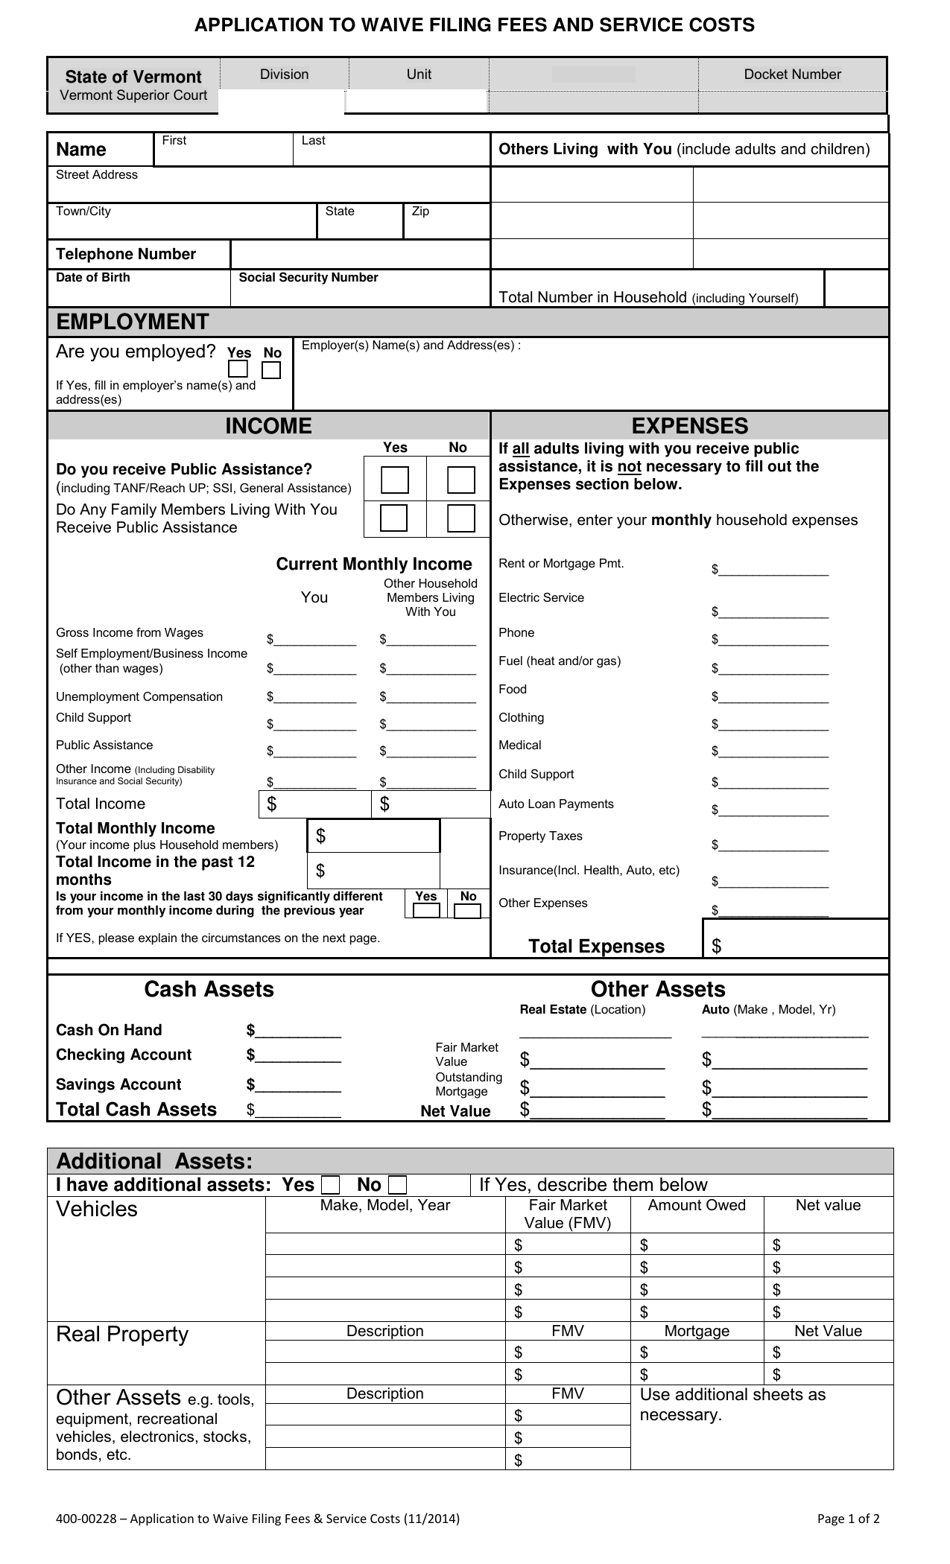 Form 400-00228 Application to Waive Filing Fees and Service Costs - Vermont, Page 1